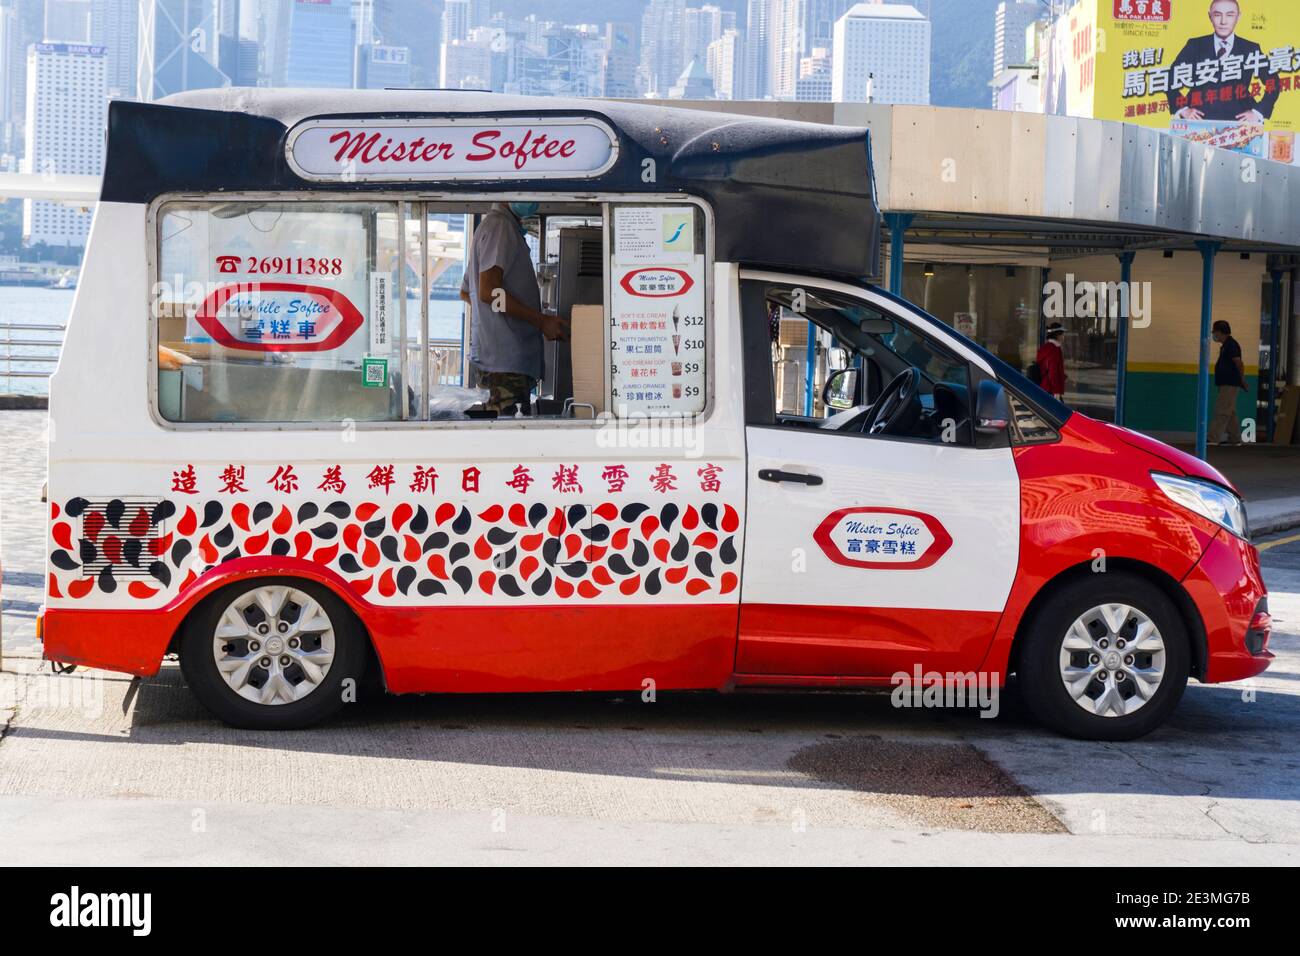 Mister Softee Ice Cream Truck parked in front of the Star Ferry Pier, Kowloon. Close Up, Eye Level View Stock Photo